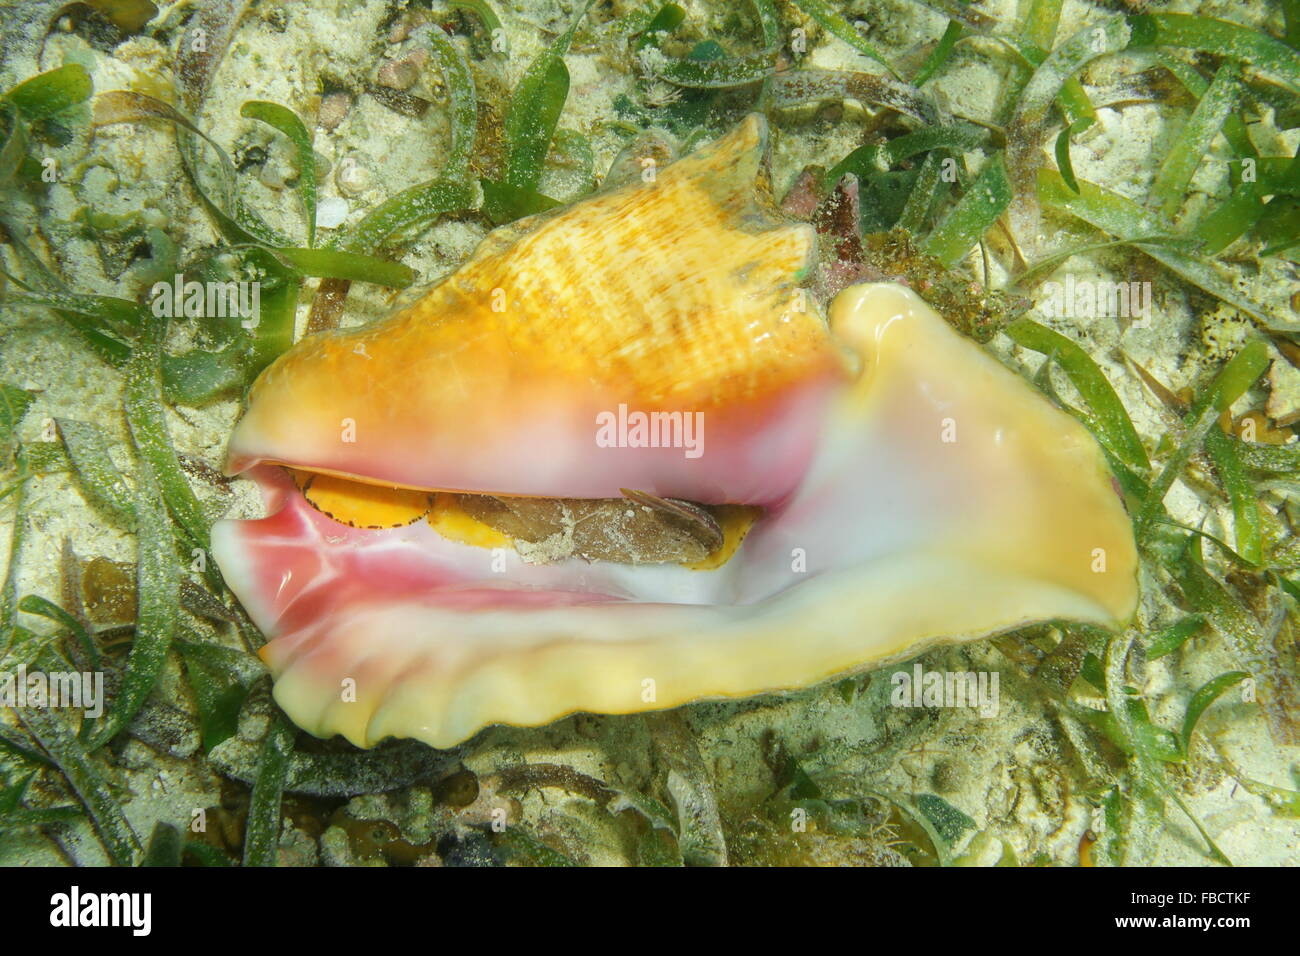 Bottom part of queen conch shell, Lobatus gigas, underwater on seabed with seagrass, alive specimen, Caribbean sea Stock Photo